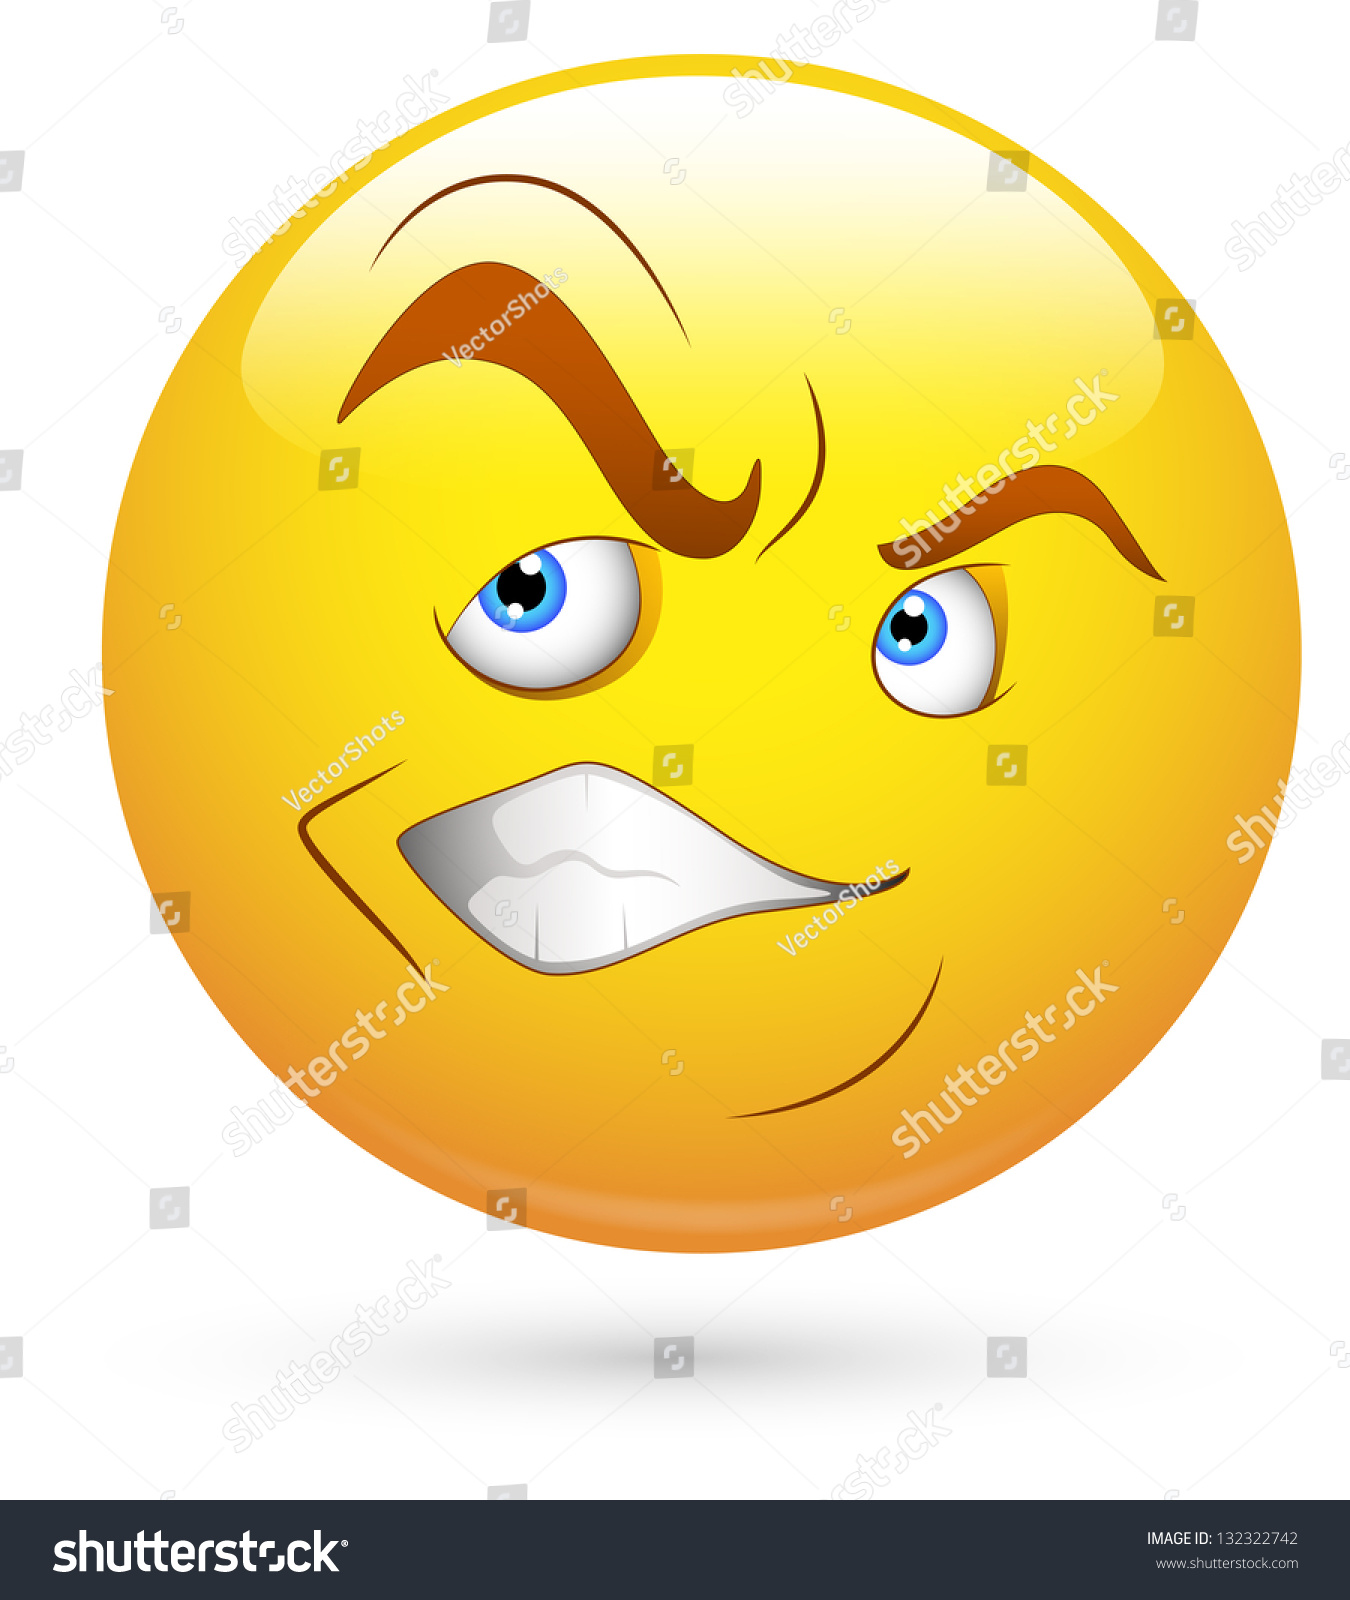 Smiley Vector Illustration Irritated Face Stock Vector (Royalty Free ...